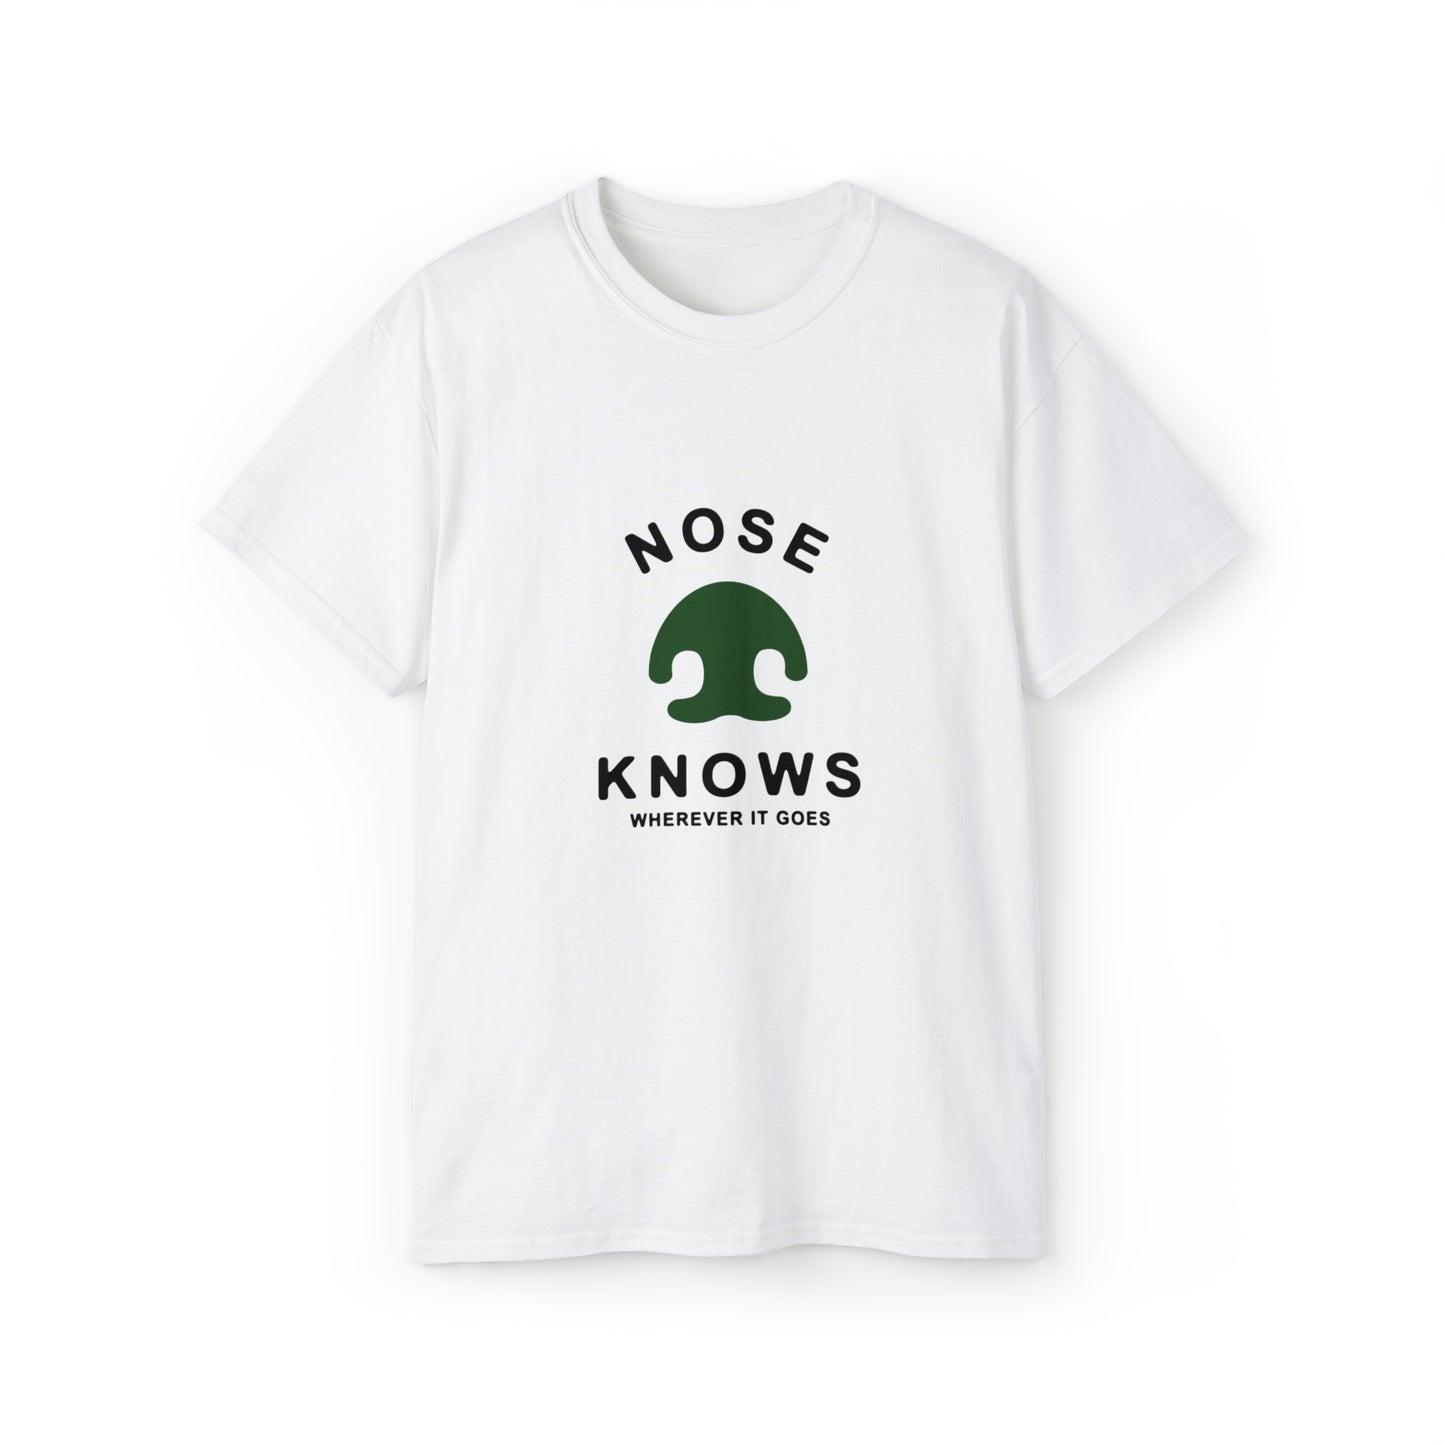 "NOSE KNOWS" Unisex Ultra Cotton Tee